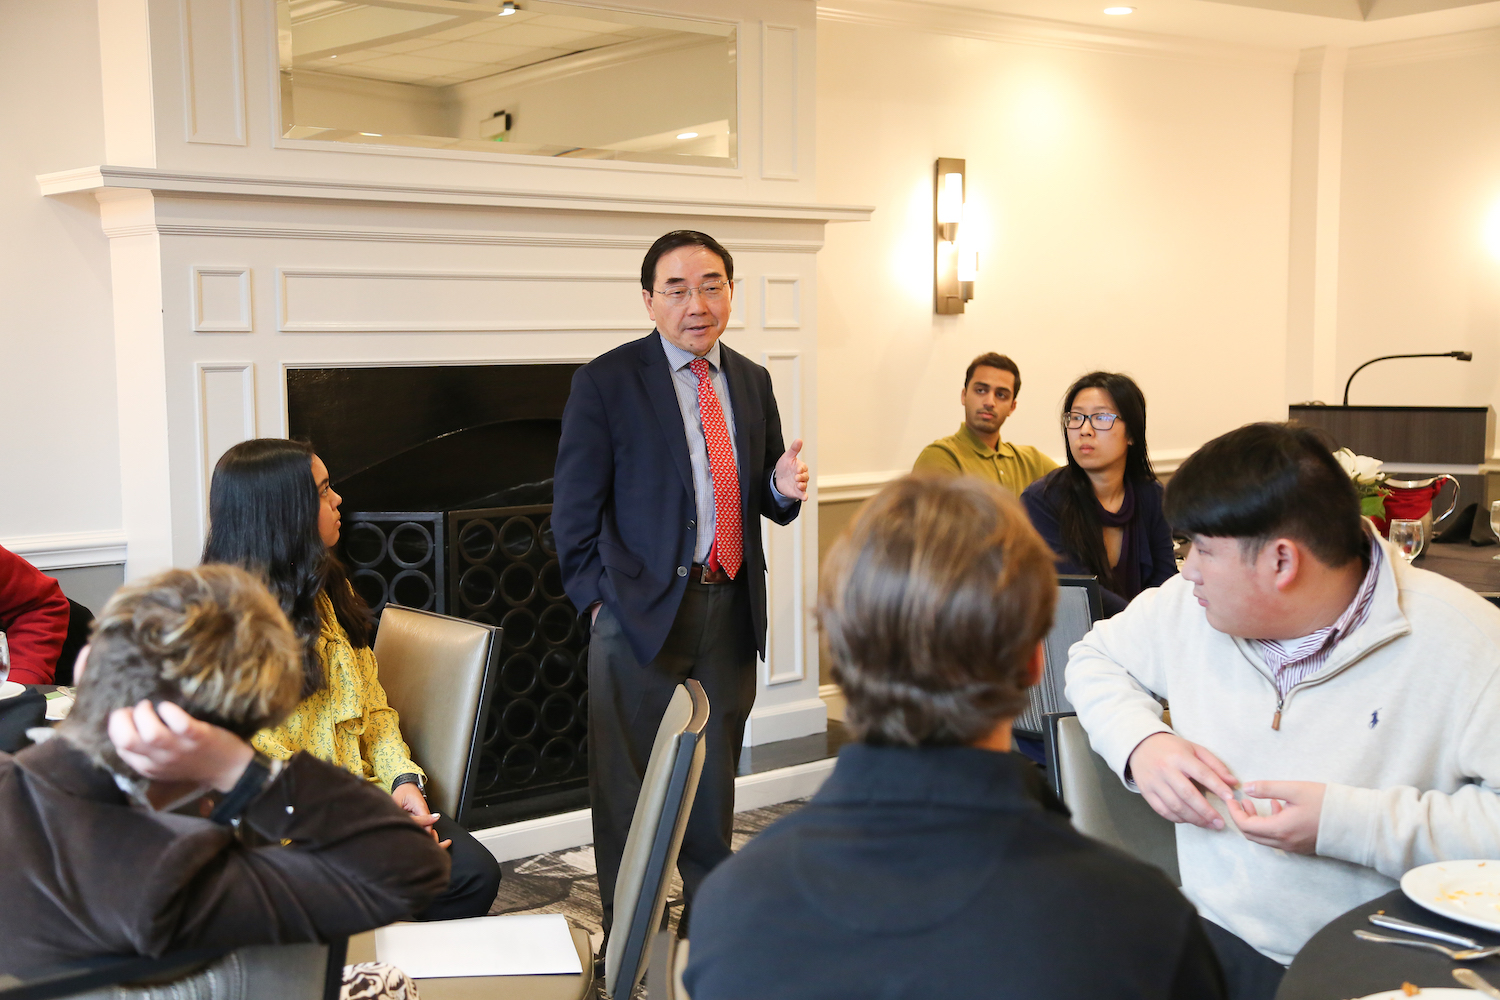 Provost S. Jack Hu speaking to a group of students at the University of Georgia.